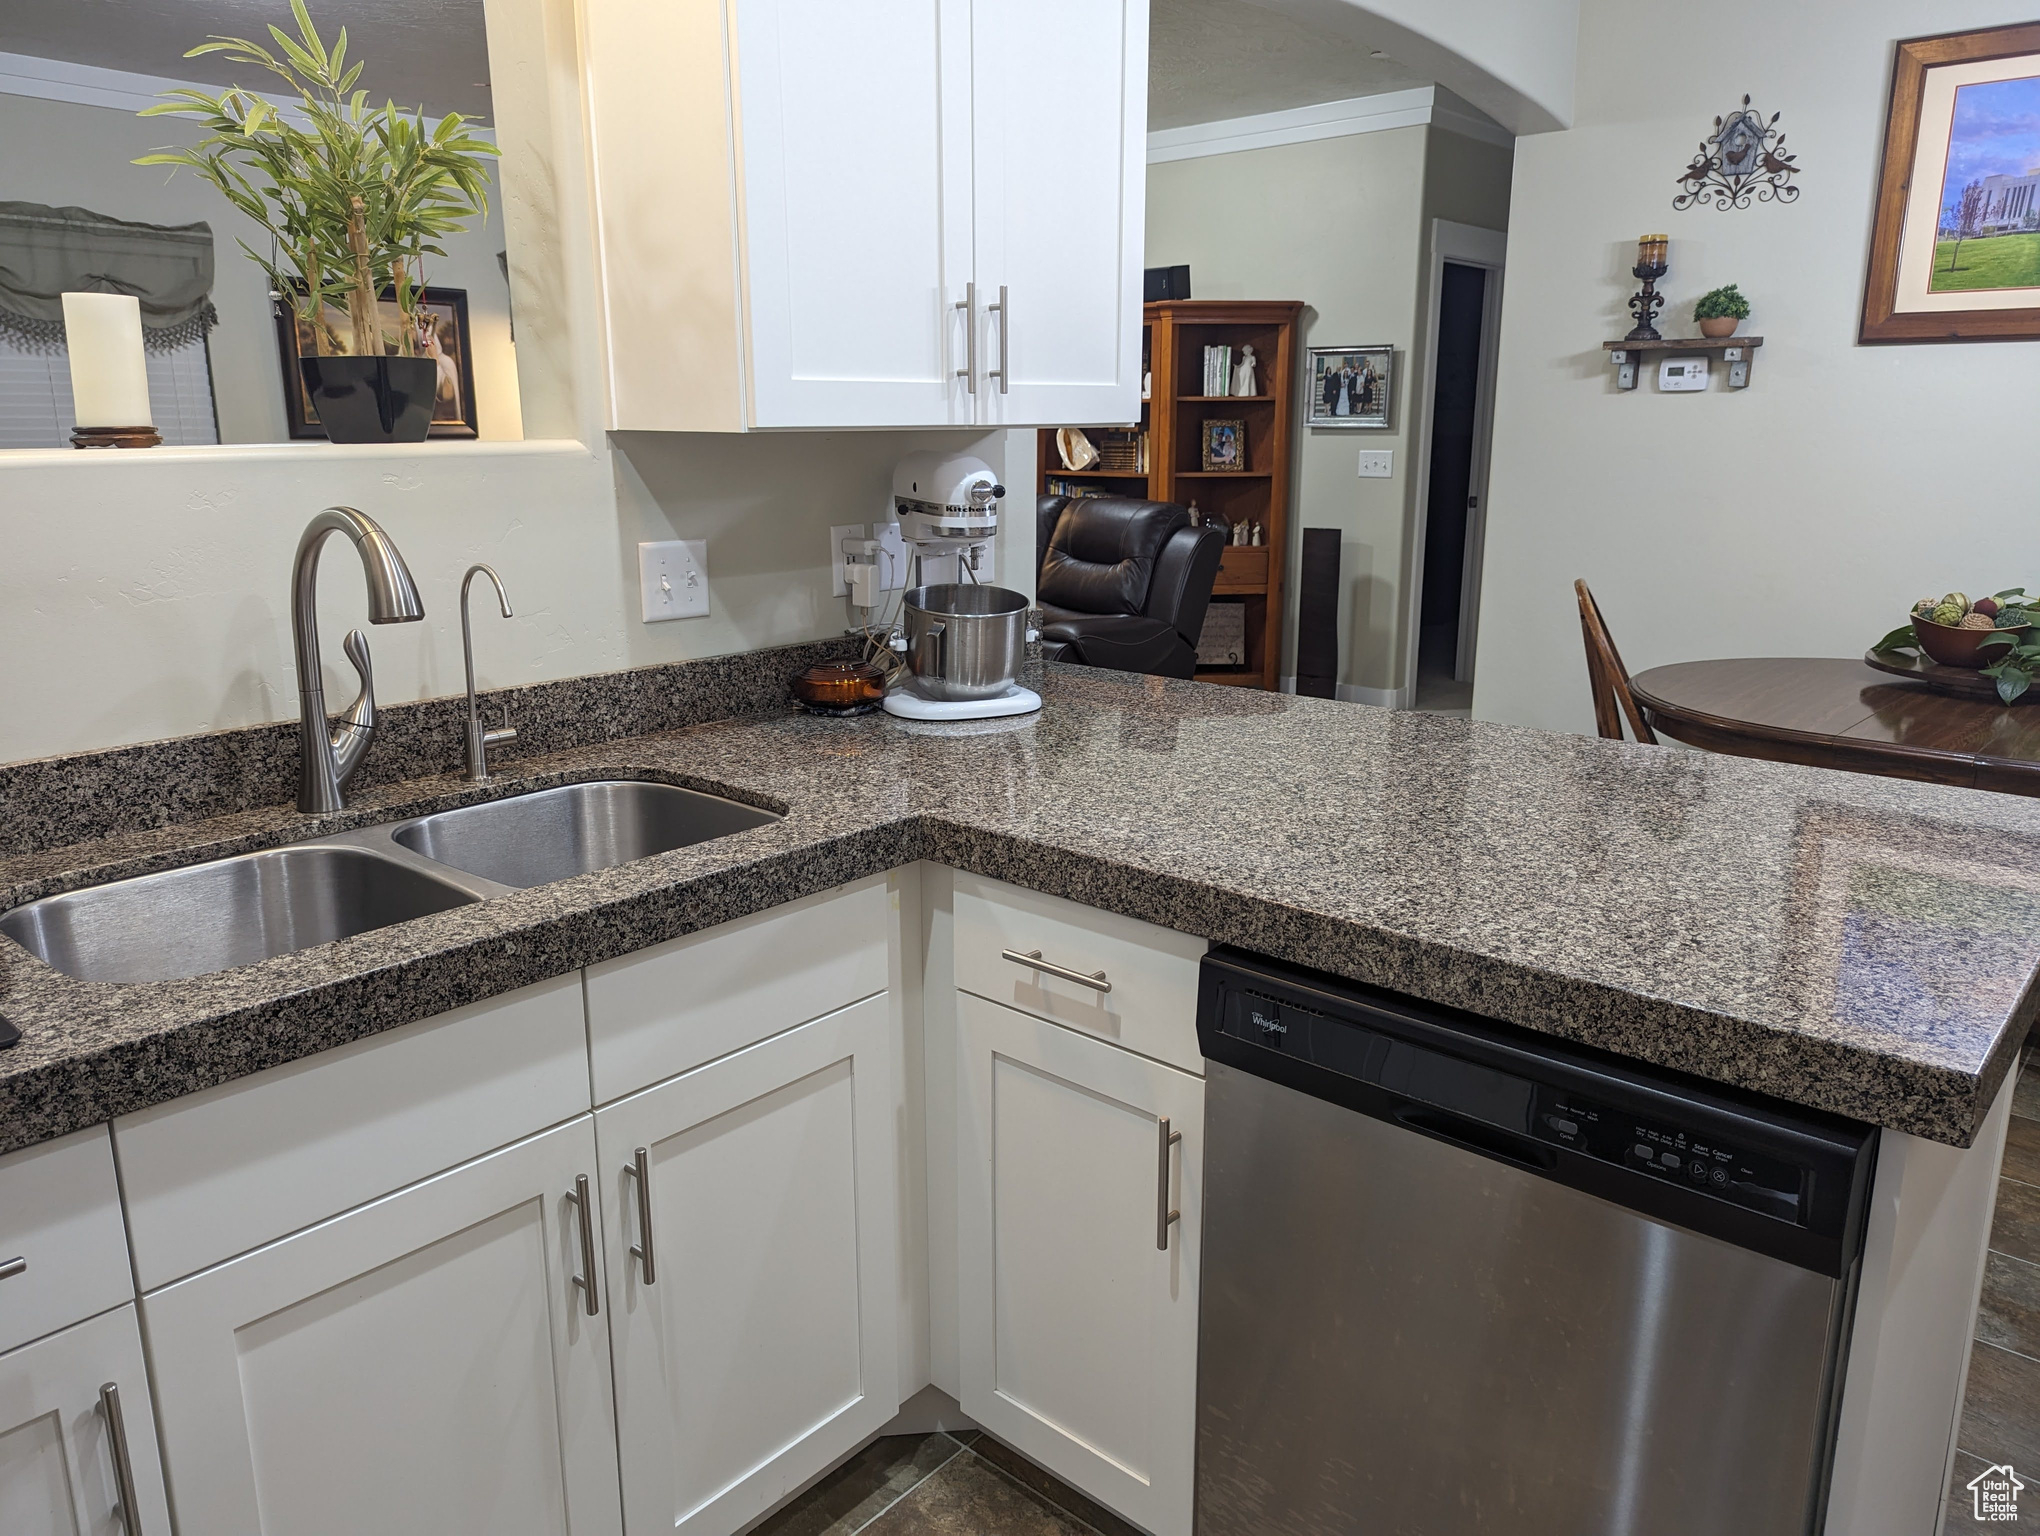 Kitchen with dishwasher, dark stone counters, white cabinets, sink, and ornamental molding